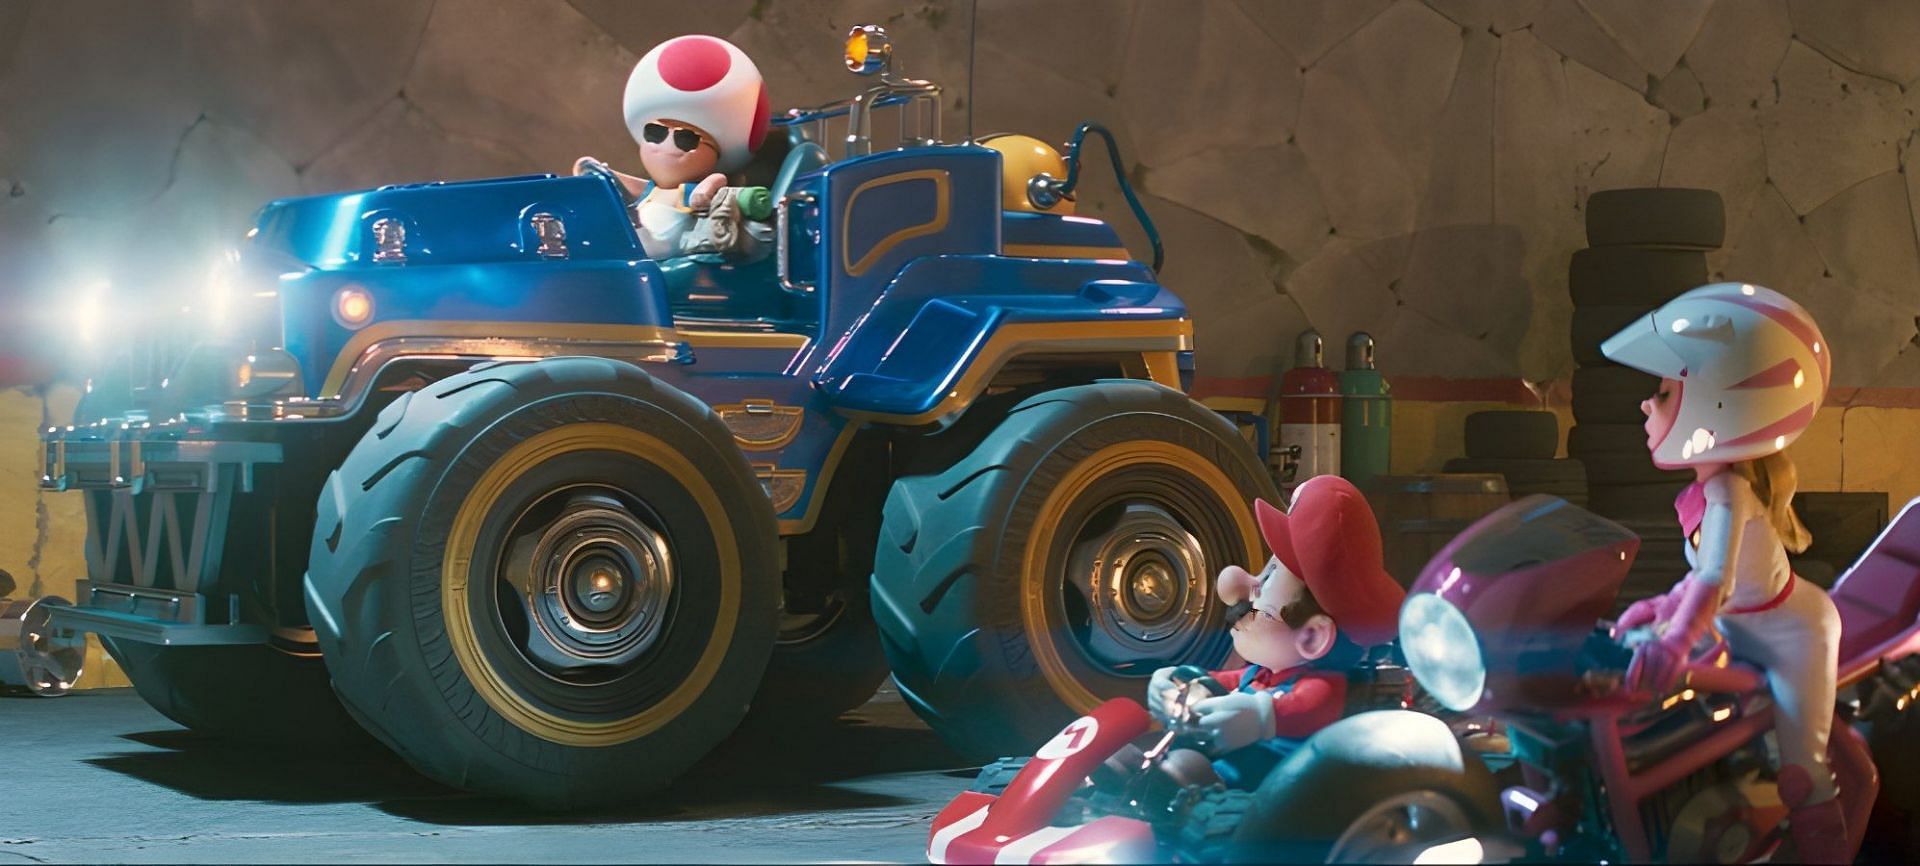 The new Mario movie offers a thrilling experience that captures the fun Easter eggs and wonders of the game. (Image via Universal Pictures)